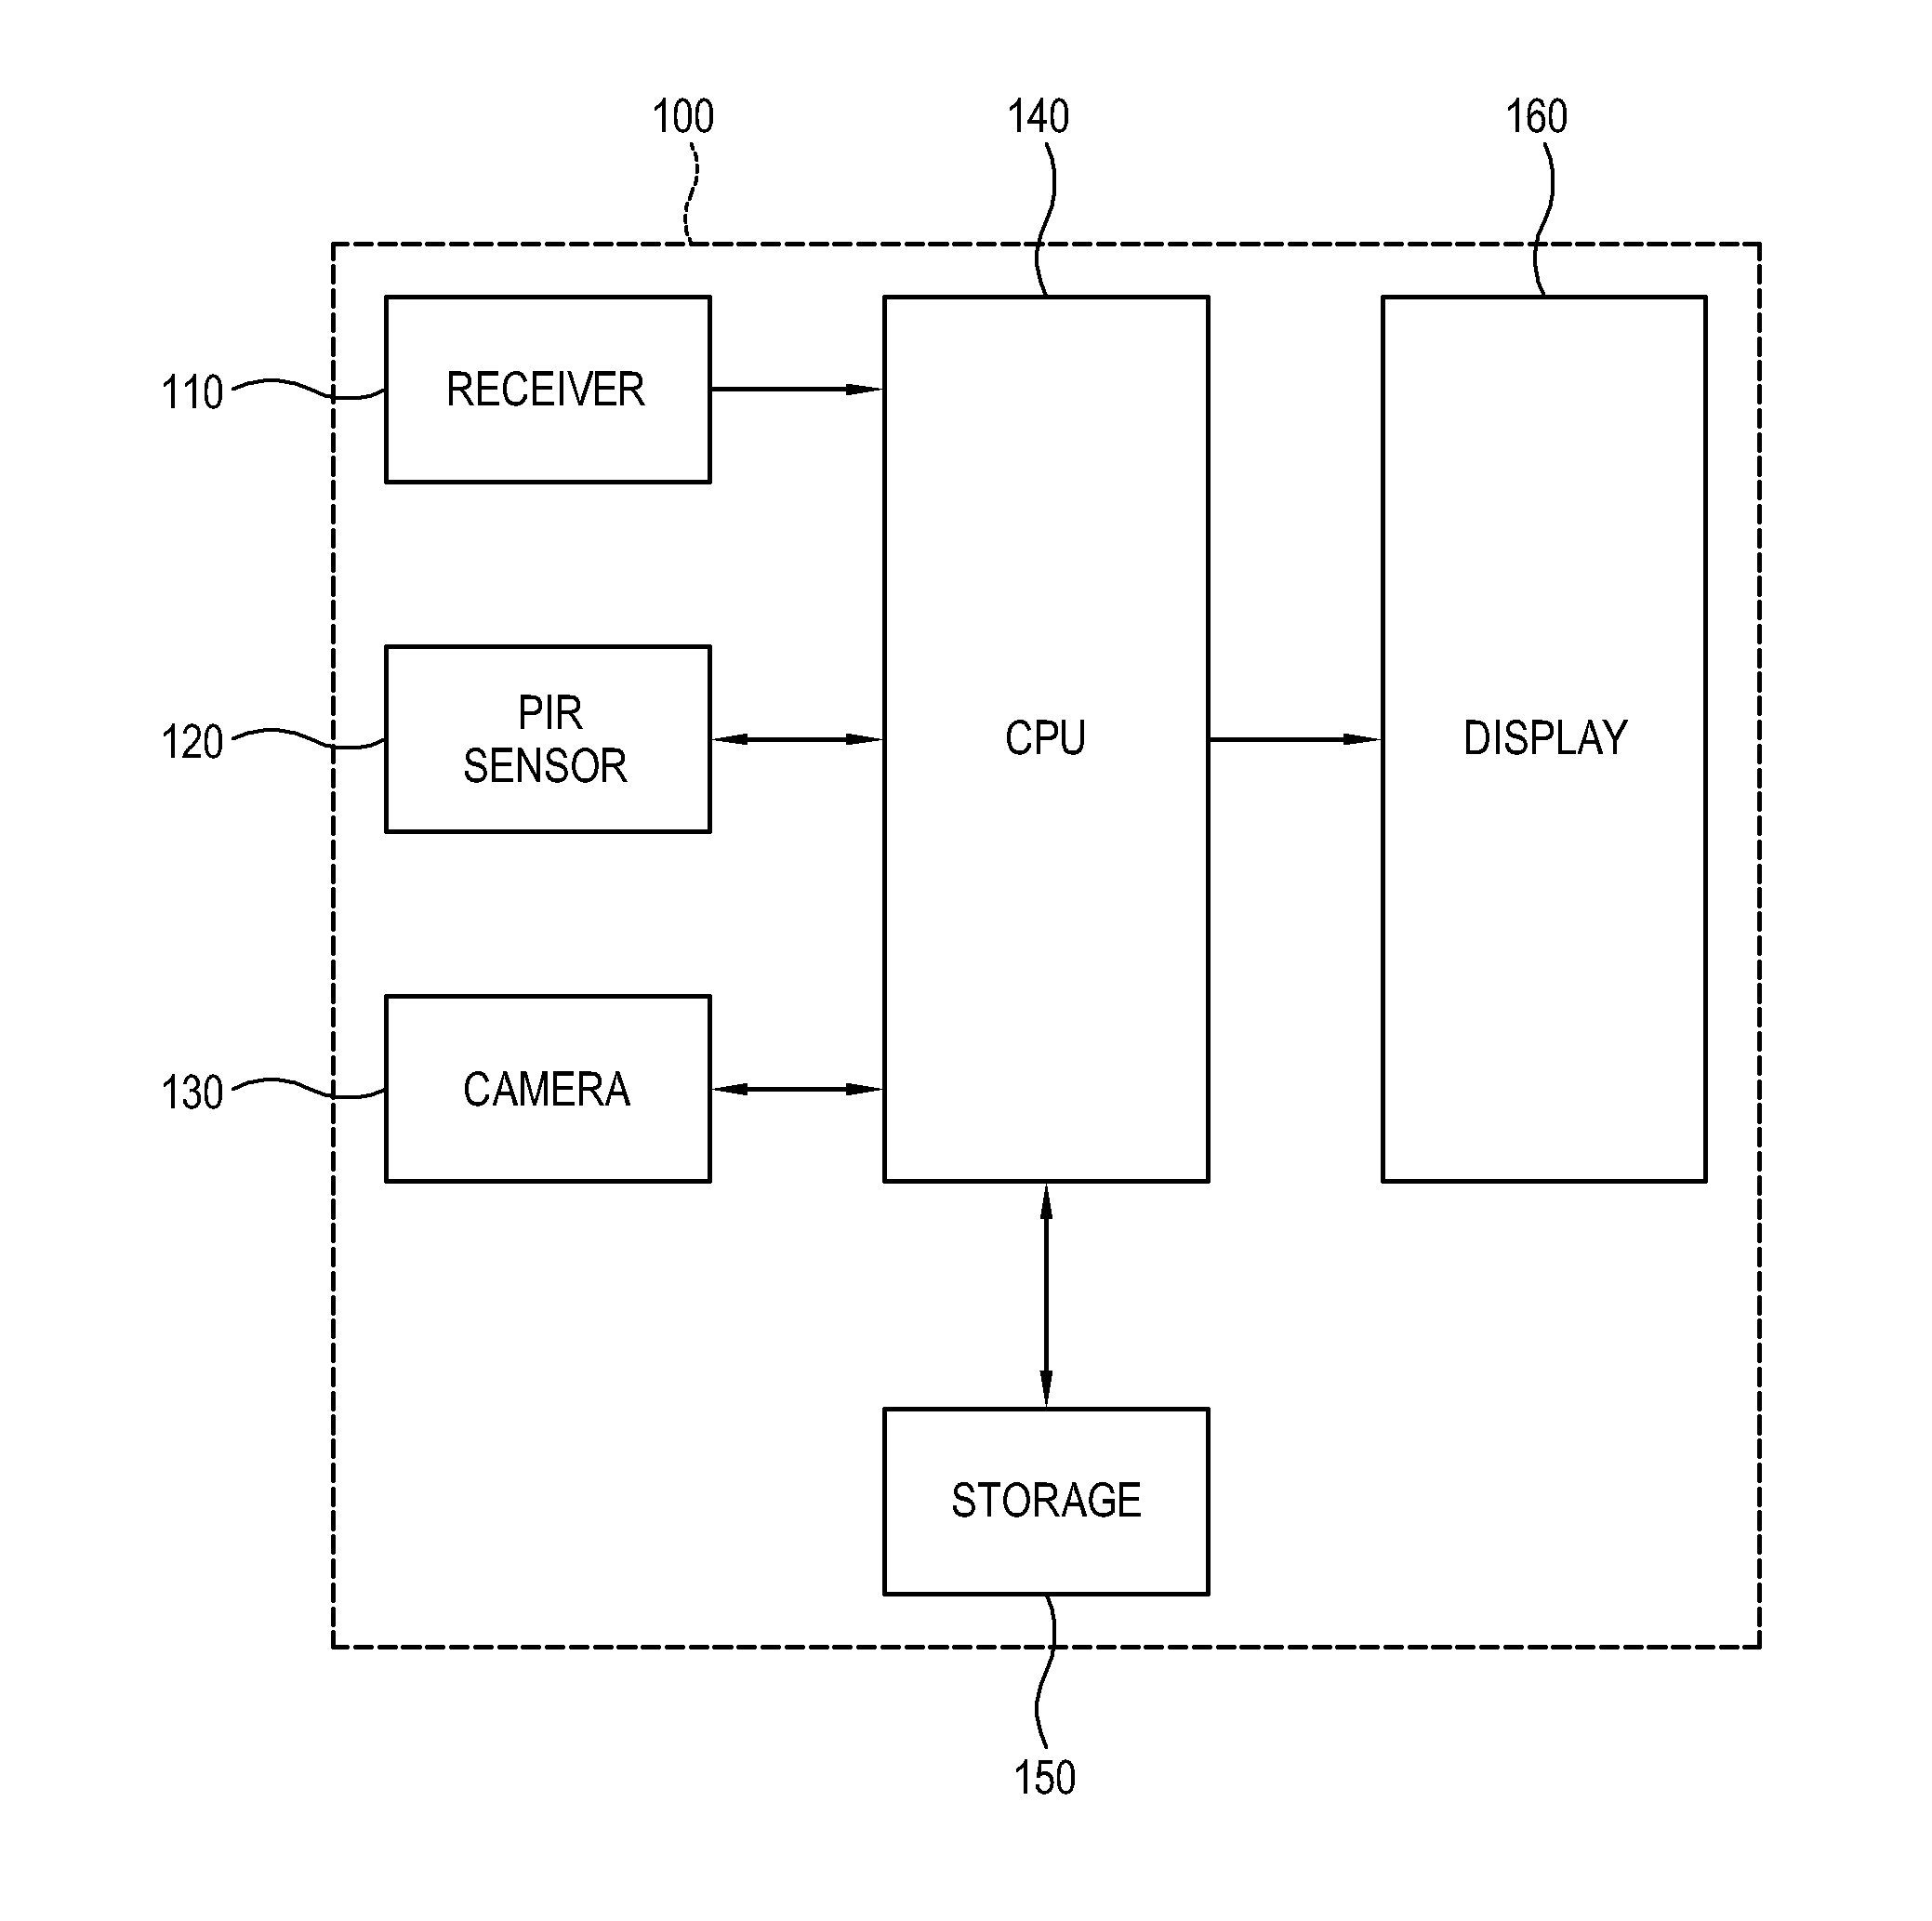 Display apparatus with a sensor and camera and control method thereof